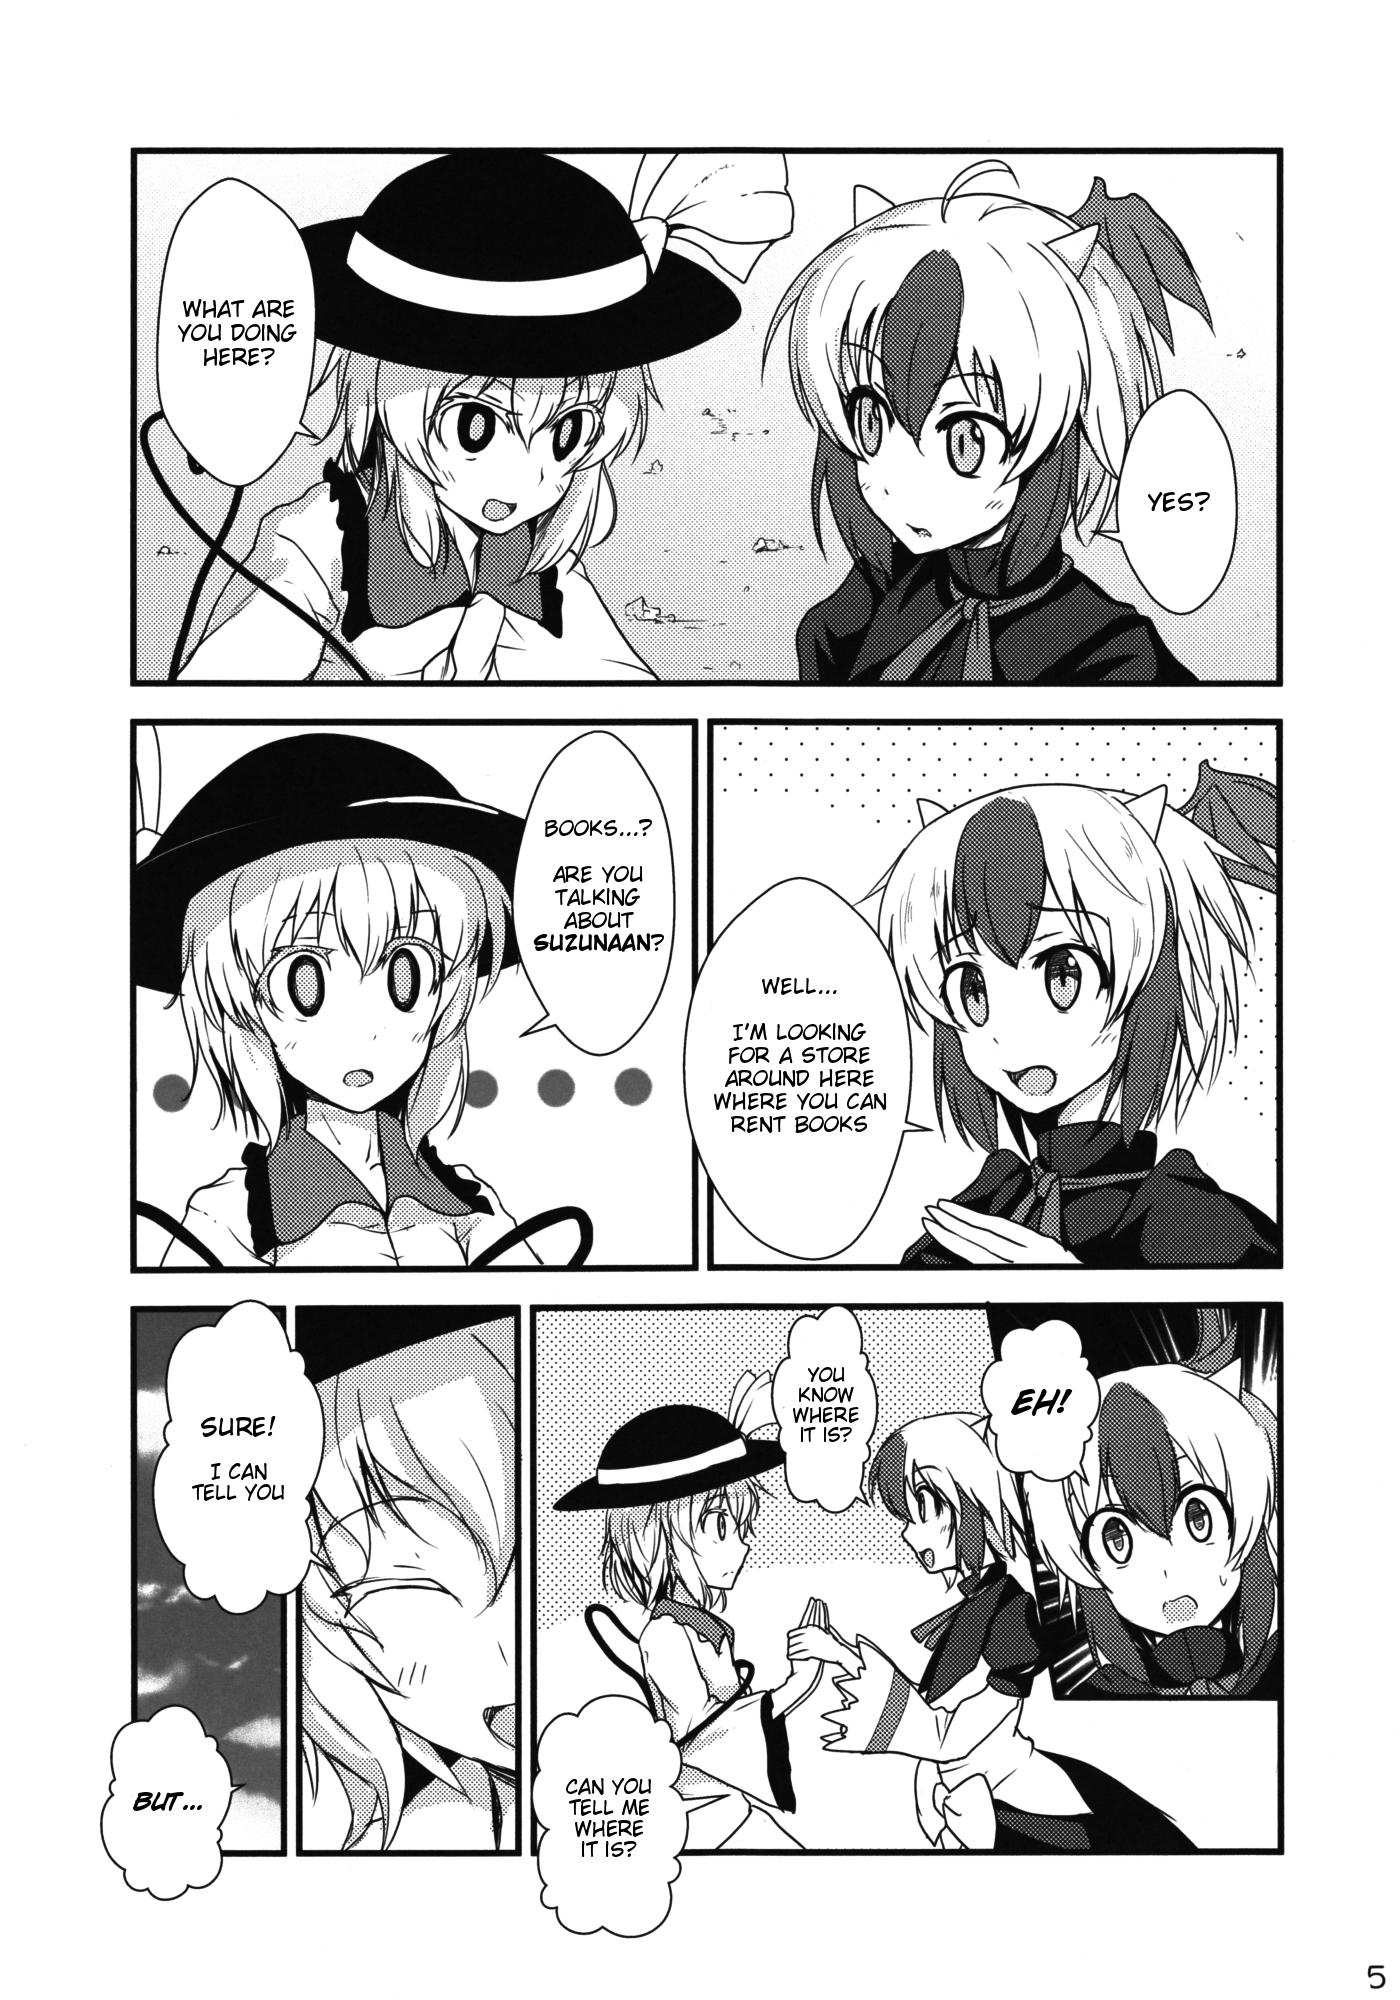 Best Blow Job Daremo Watashi o Miteinai | No One Can See Me - Touhou project Blowing - Page 4